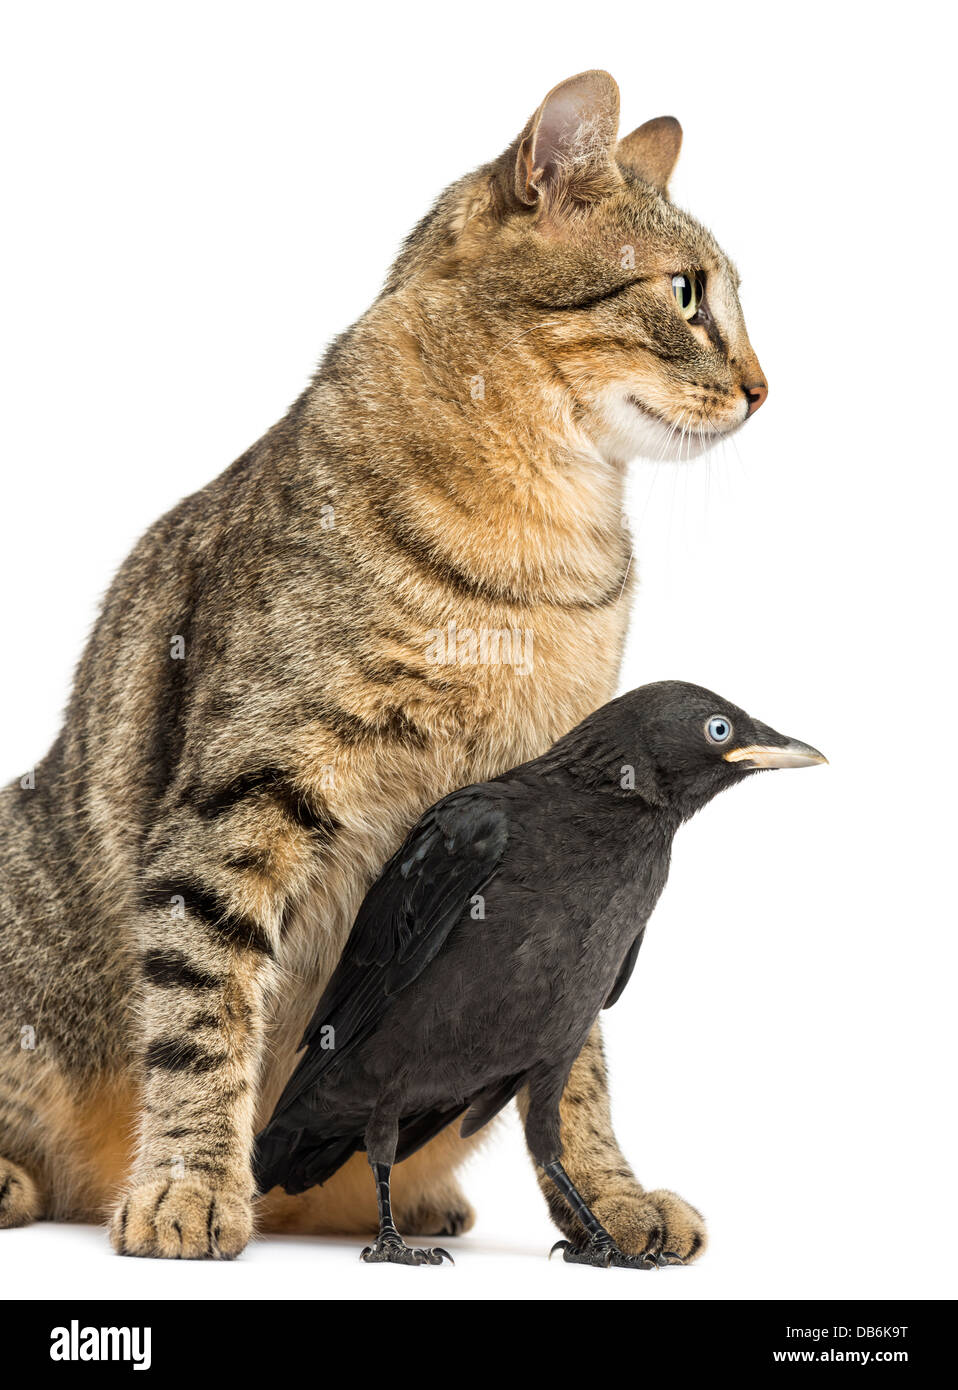 Western Jackdaw, Corvus monedula, and cat looking in the same direction against white background Stock Photo